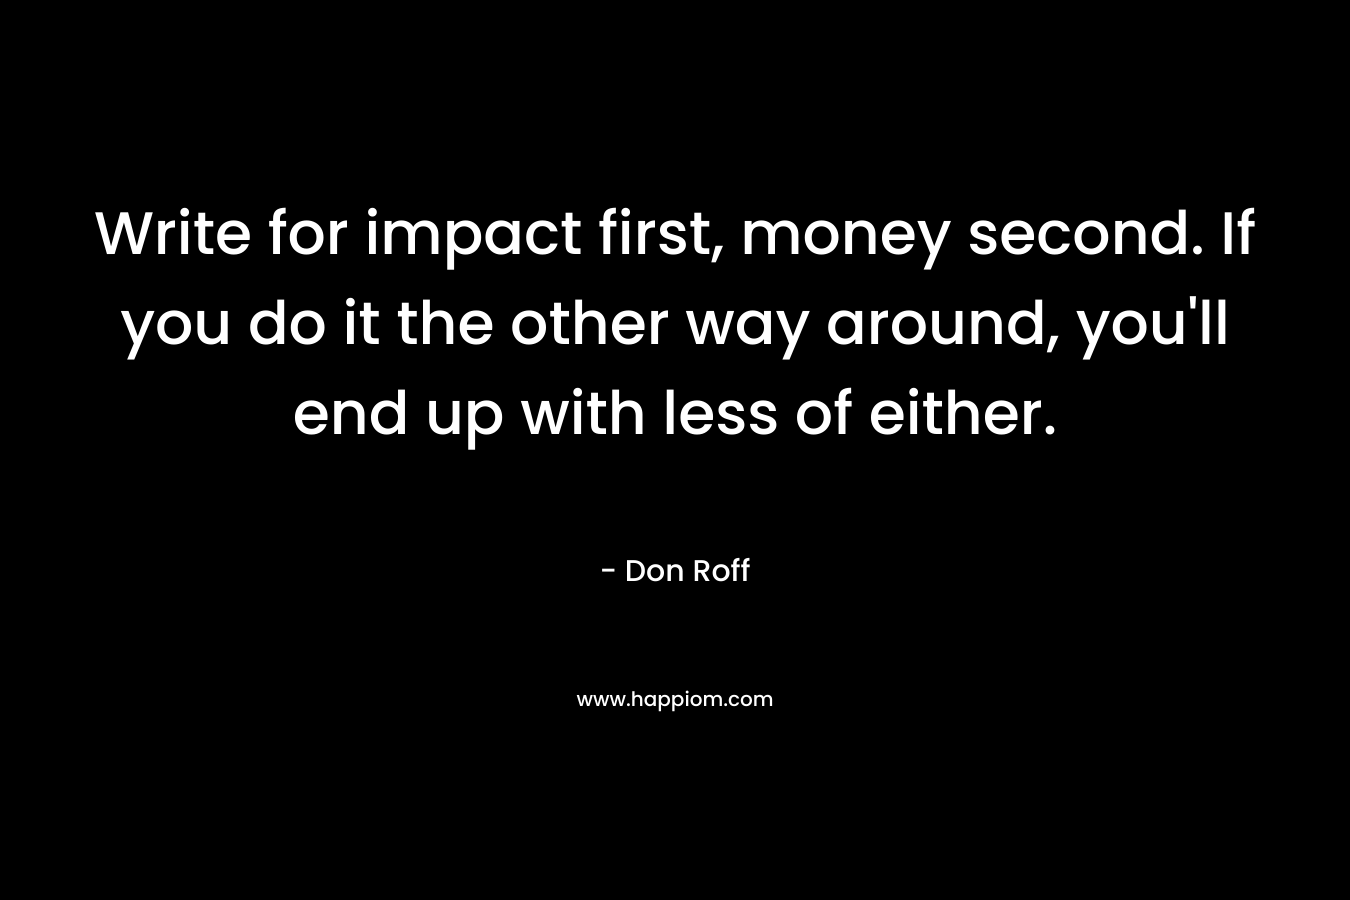 Write for impact first, money second. If you do it the other way around, you’ll end up with less of either. – Don Roff